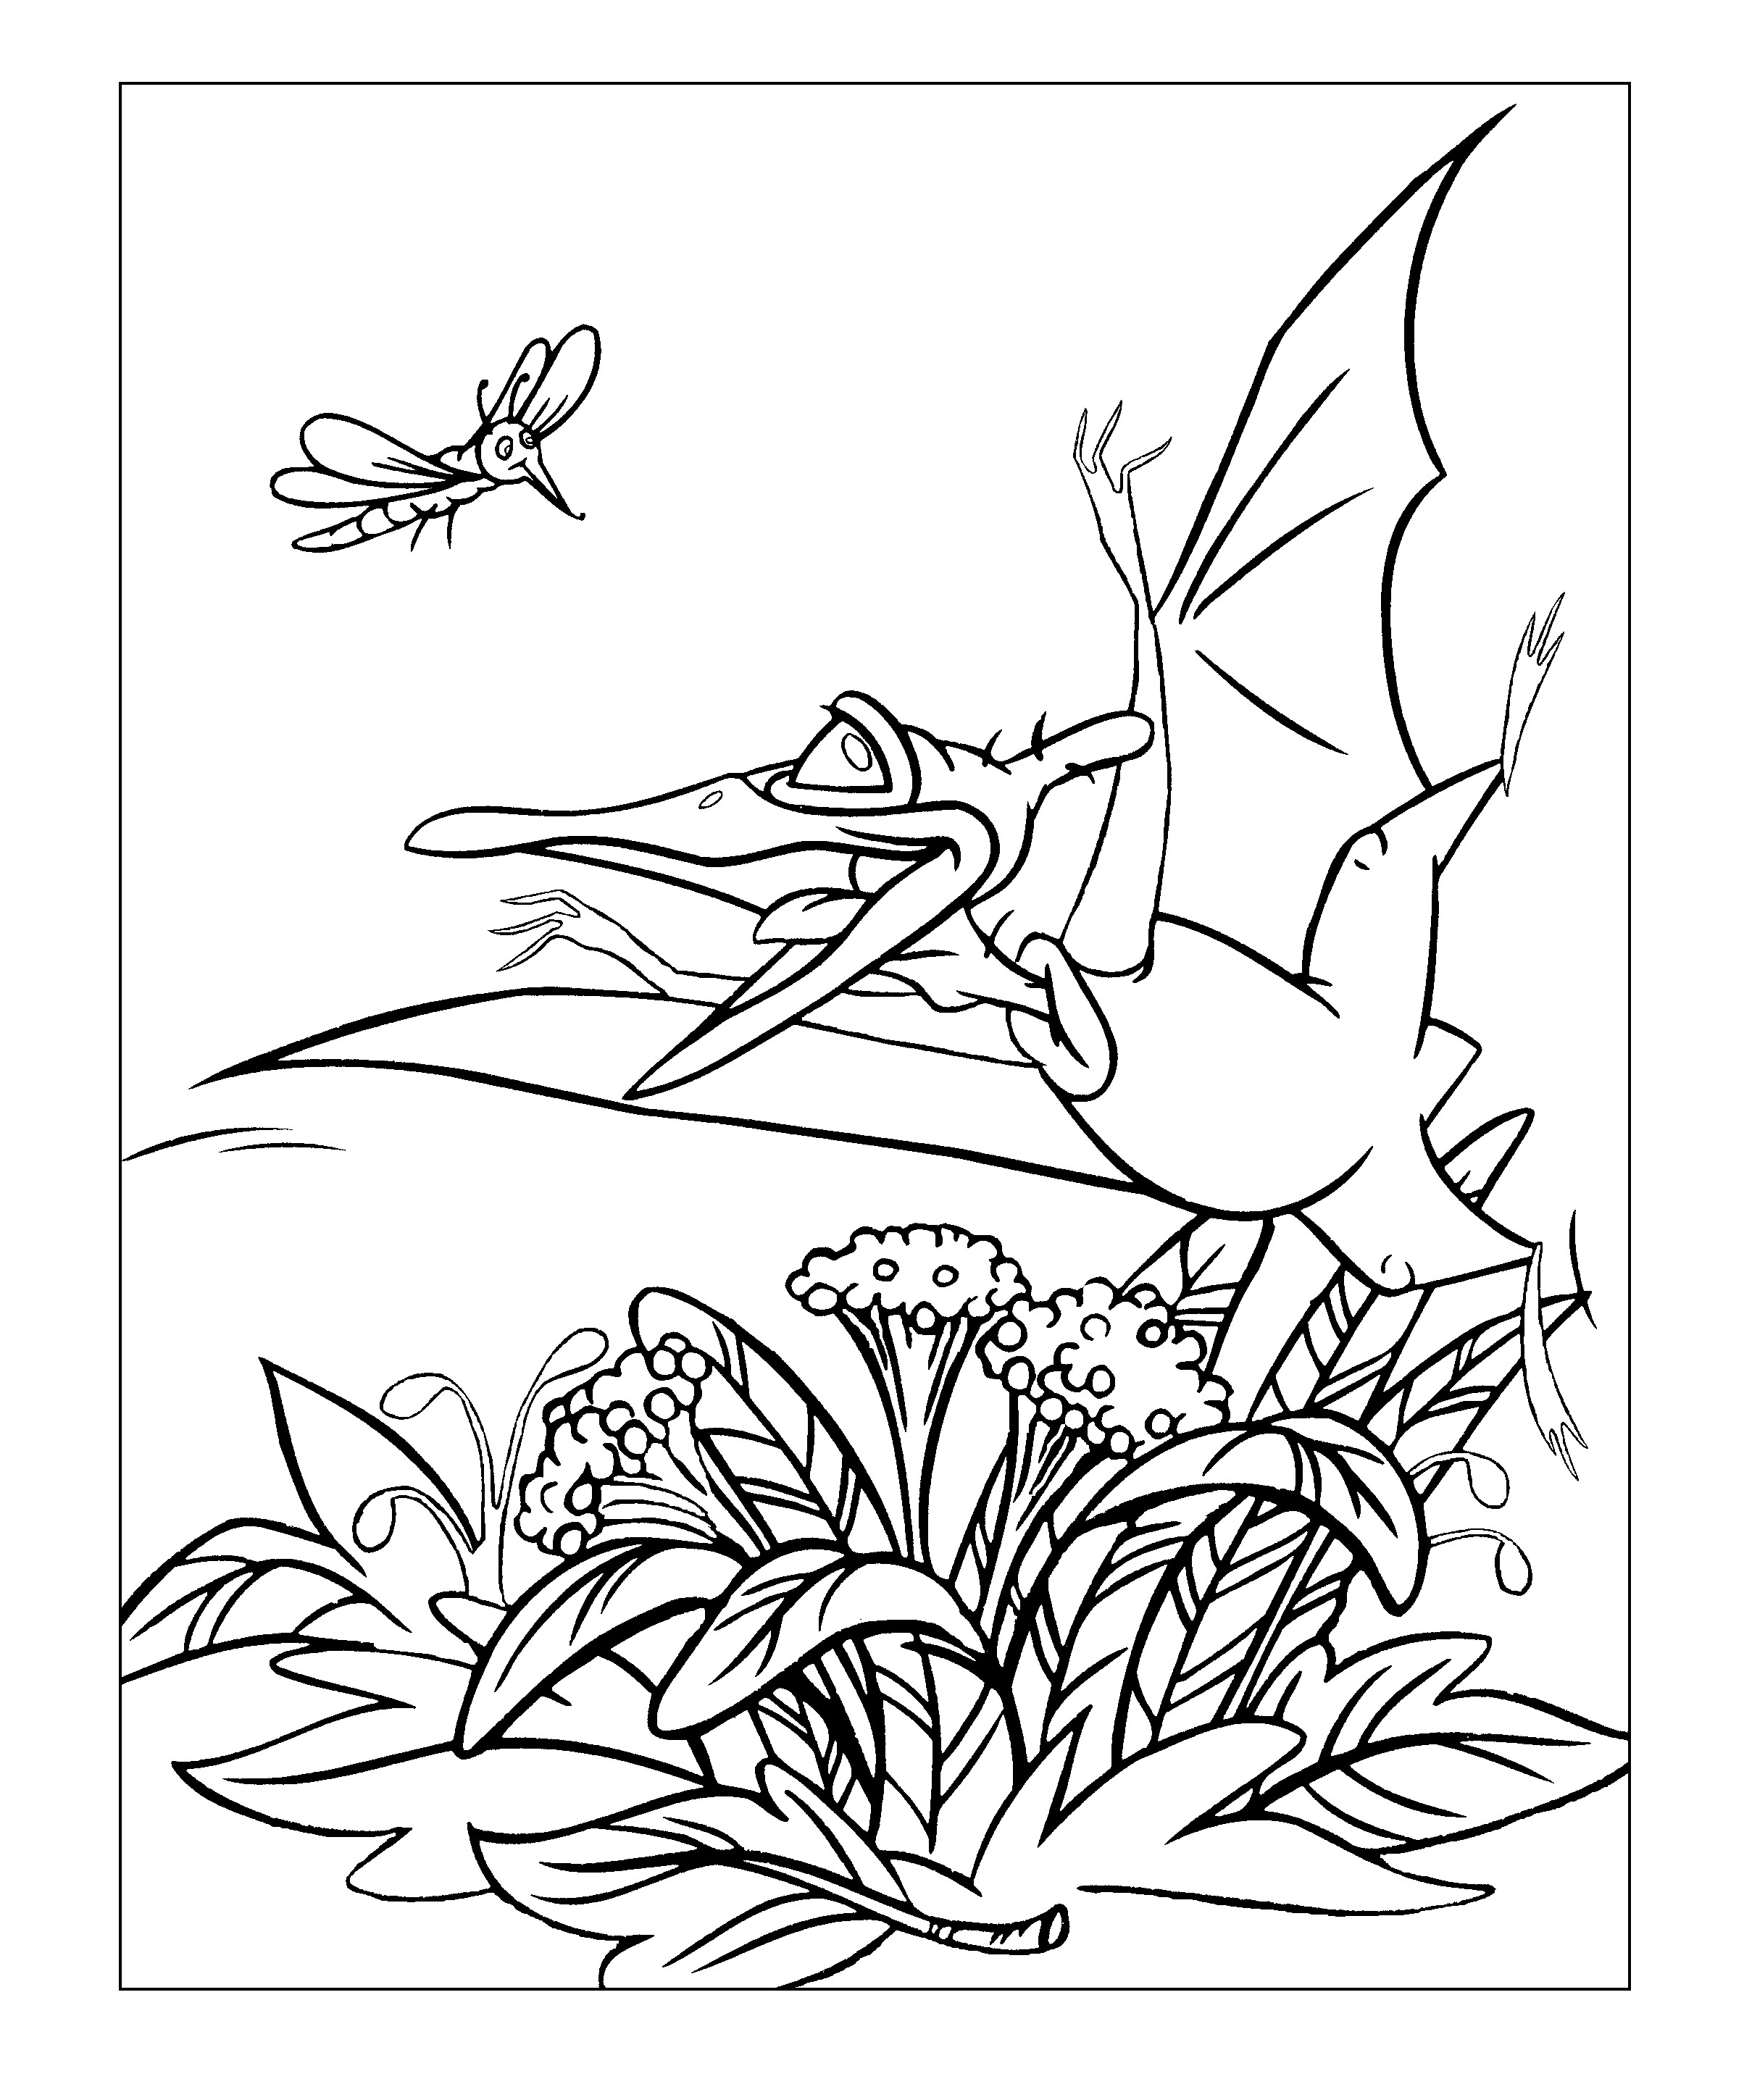 dinosaurs-before-dark-coloring-pages-bubakids